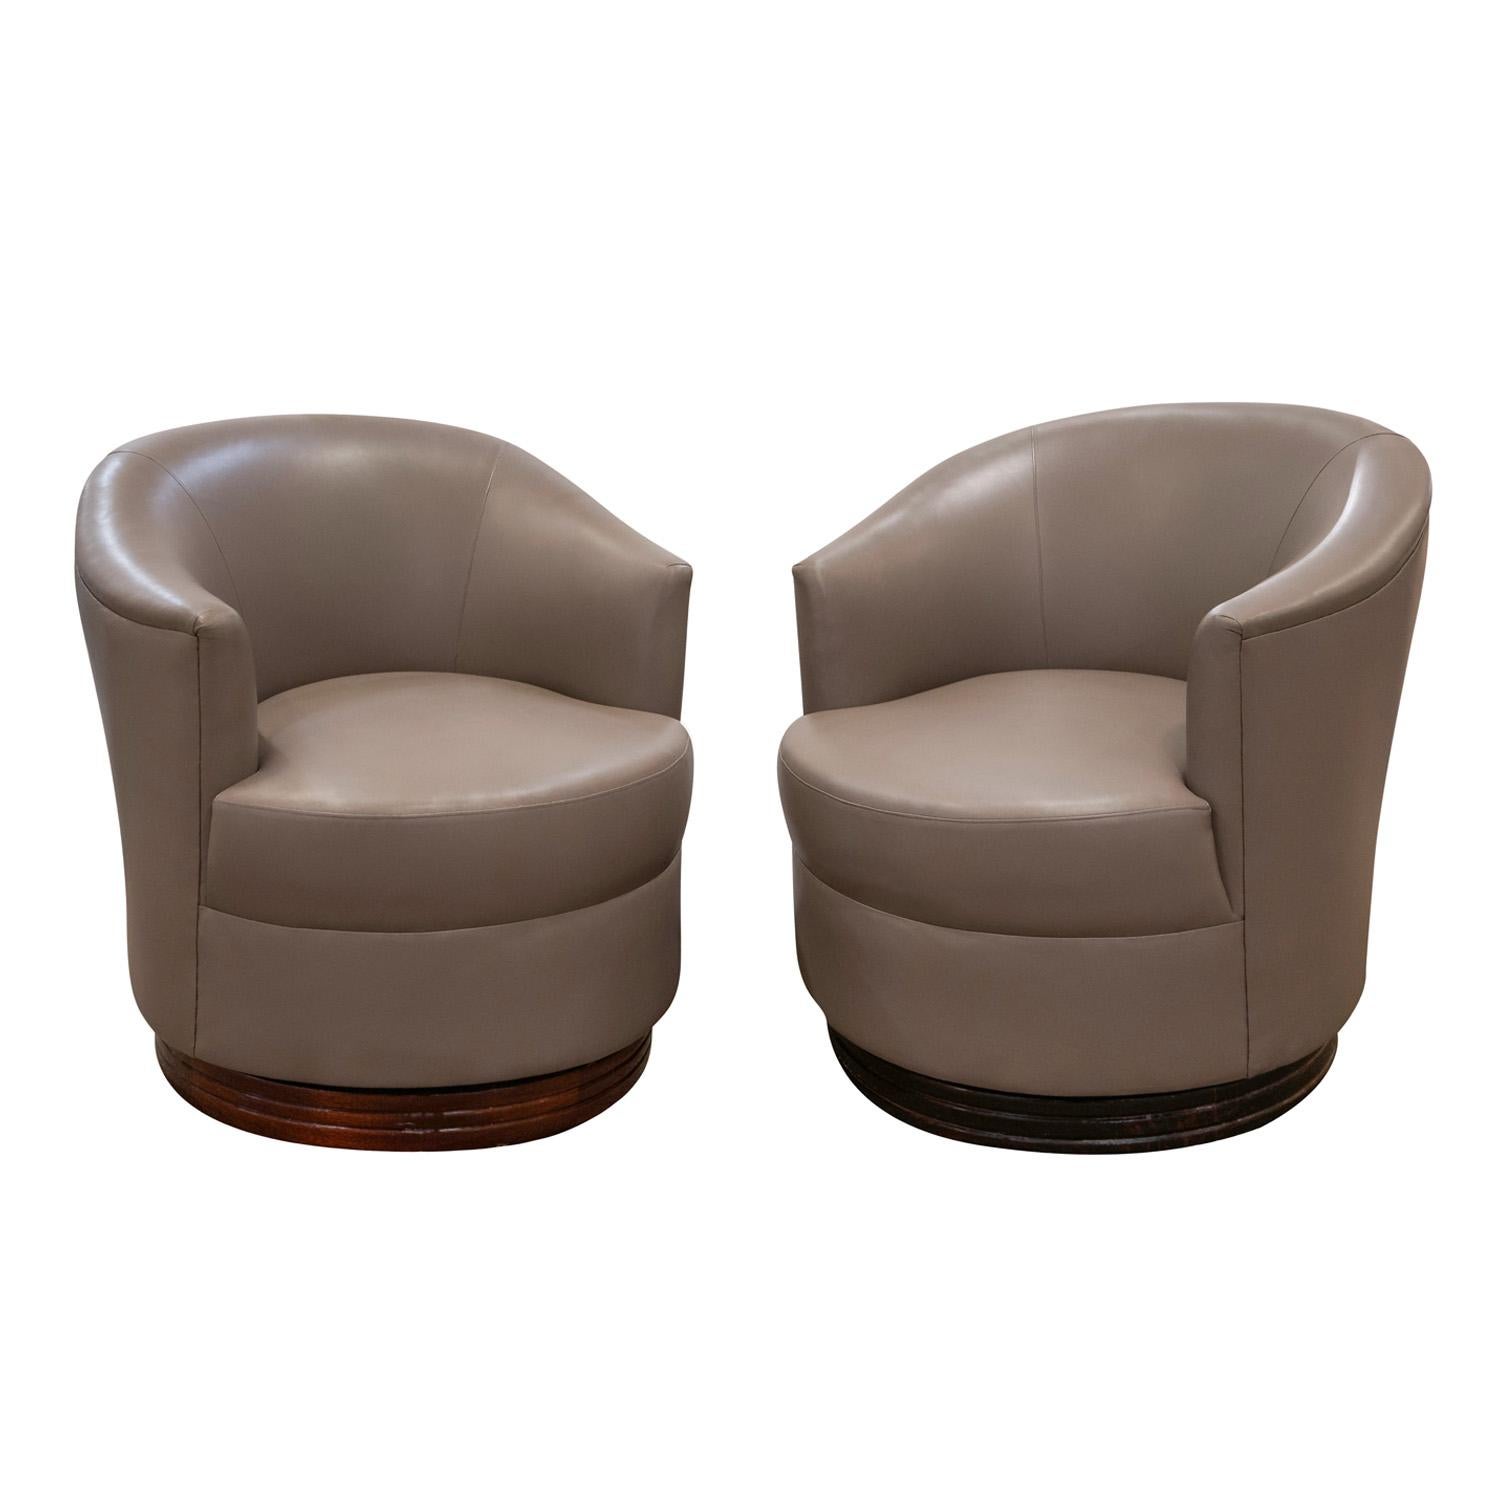 Pair of beautifully crafted swivel chairs with channeled solid mahogany bases by Karl Springer, American late-1980s. These chairs were recently reupholstered in taupe lambskin.  They are nicely proportioned and very comfortable.

Reference:
Karl